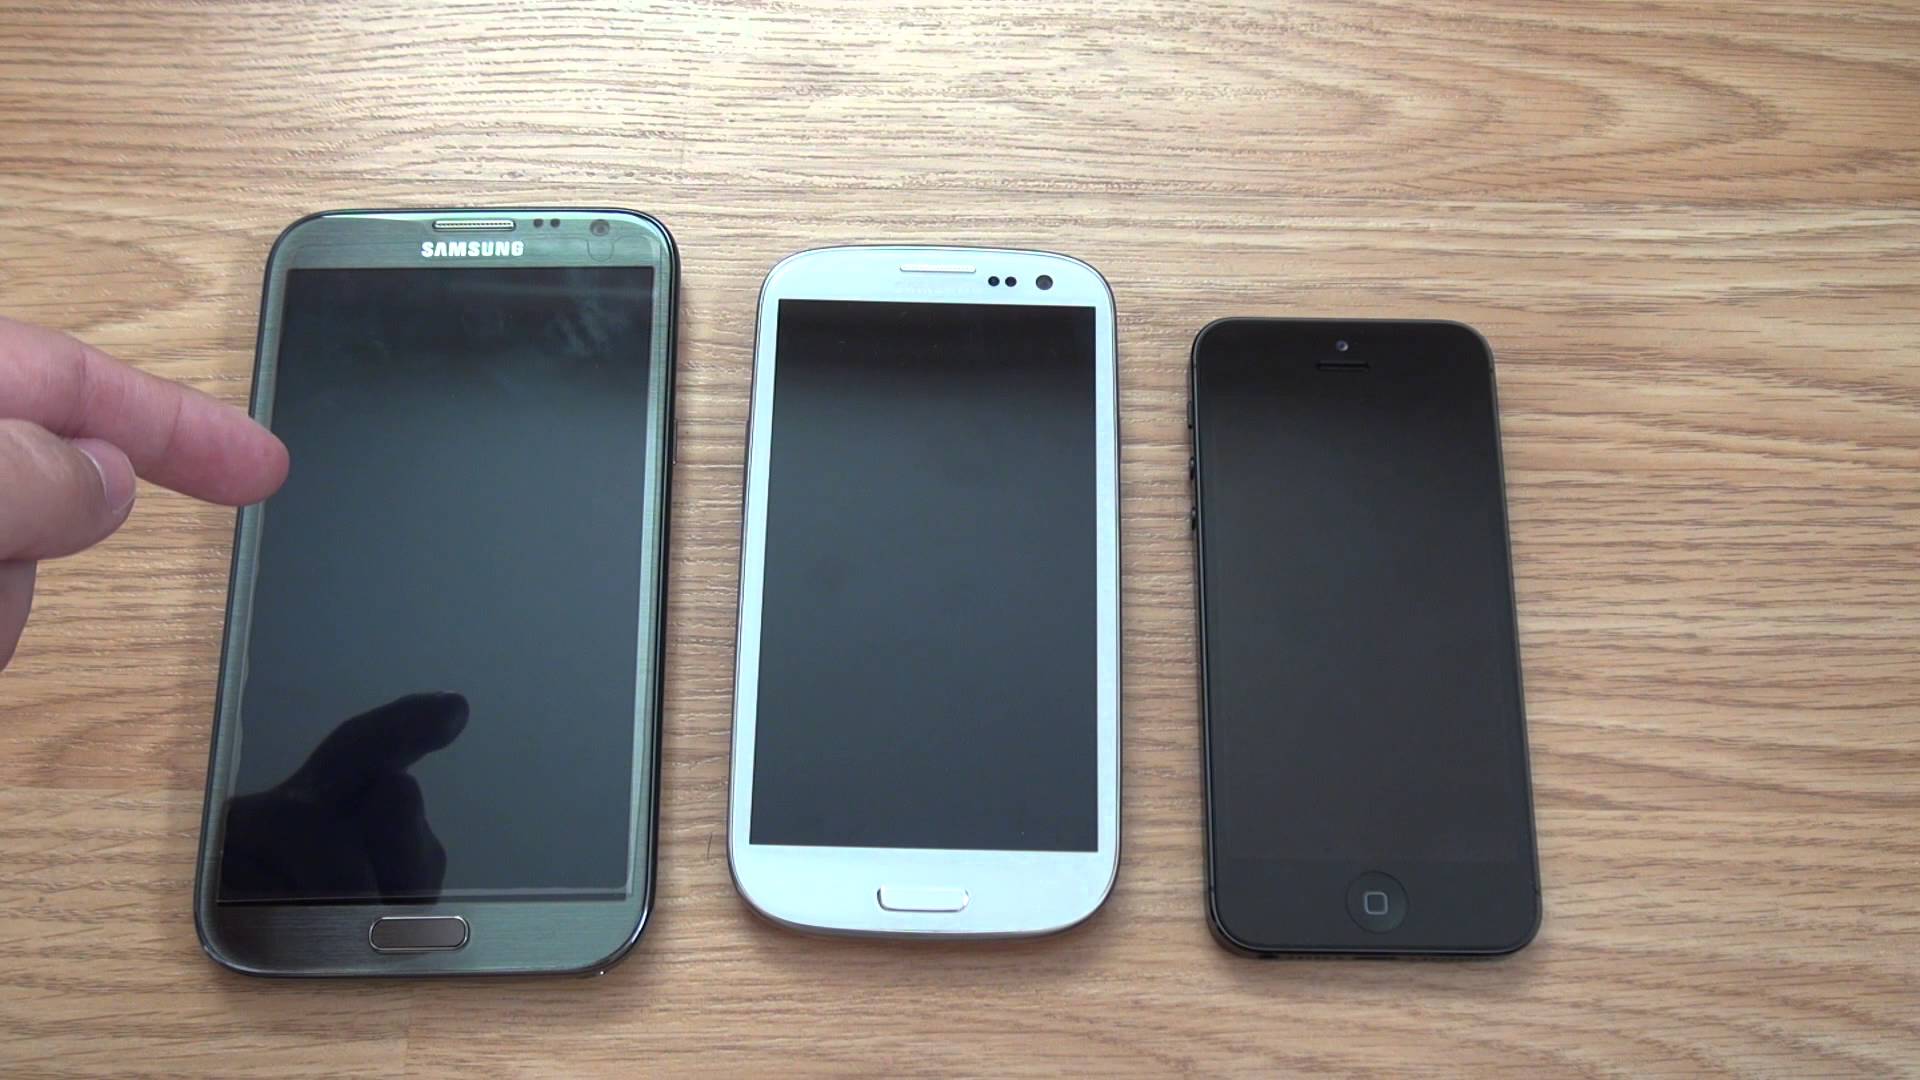 Galaxy SIII vs iPhone 5 *Ultimate, Insightful Review* (TIME CODED)